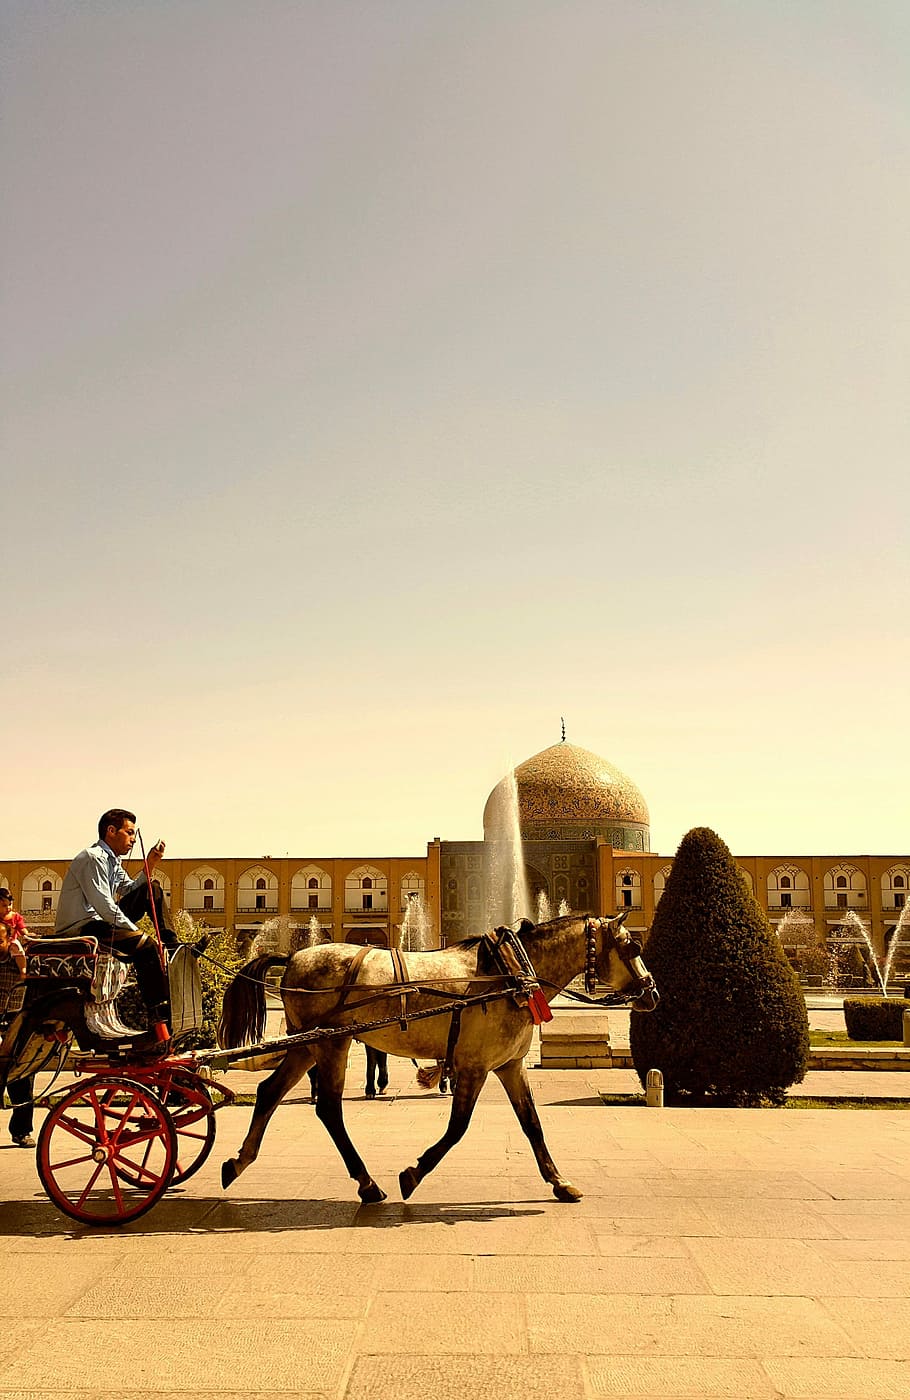 Iran, Isfahan, Carriage, Mosque, Tree, horse, warm, history, adult, transportation